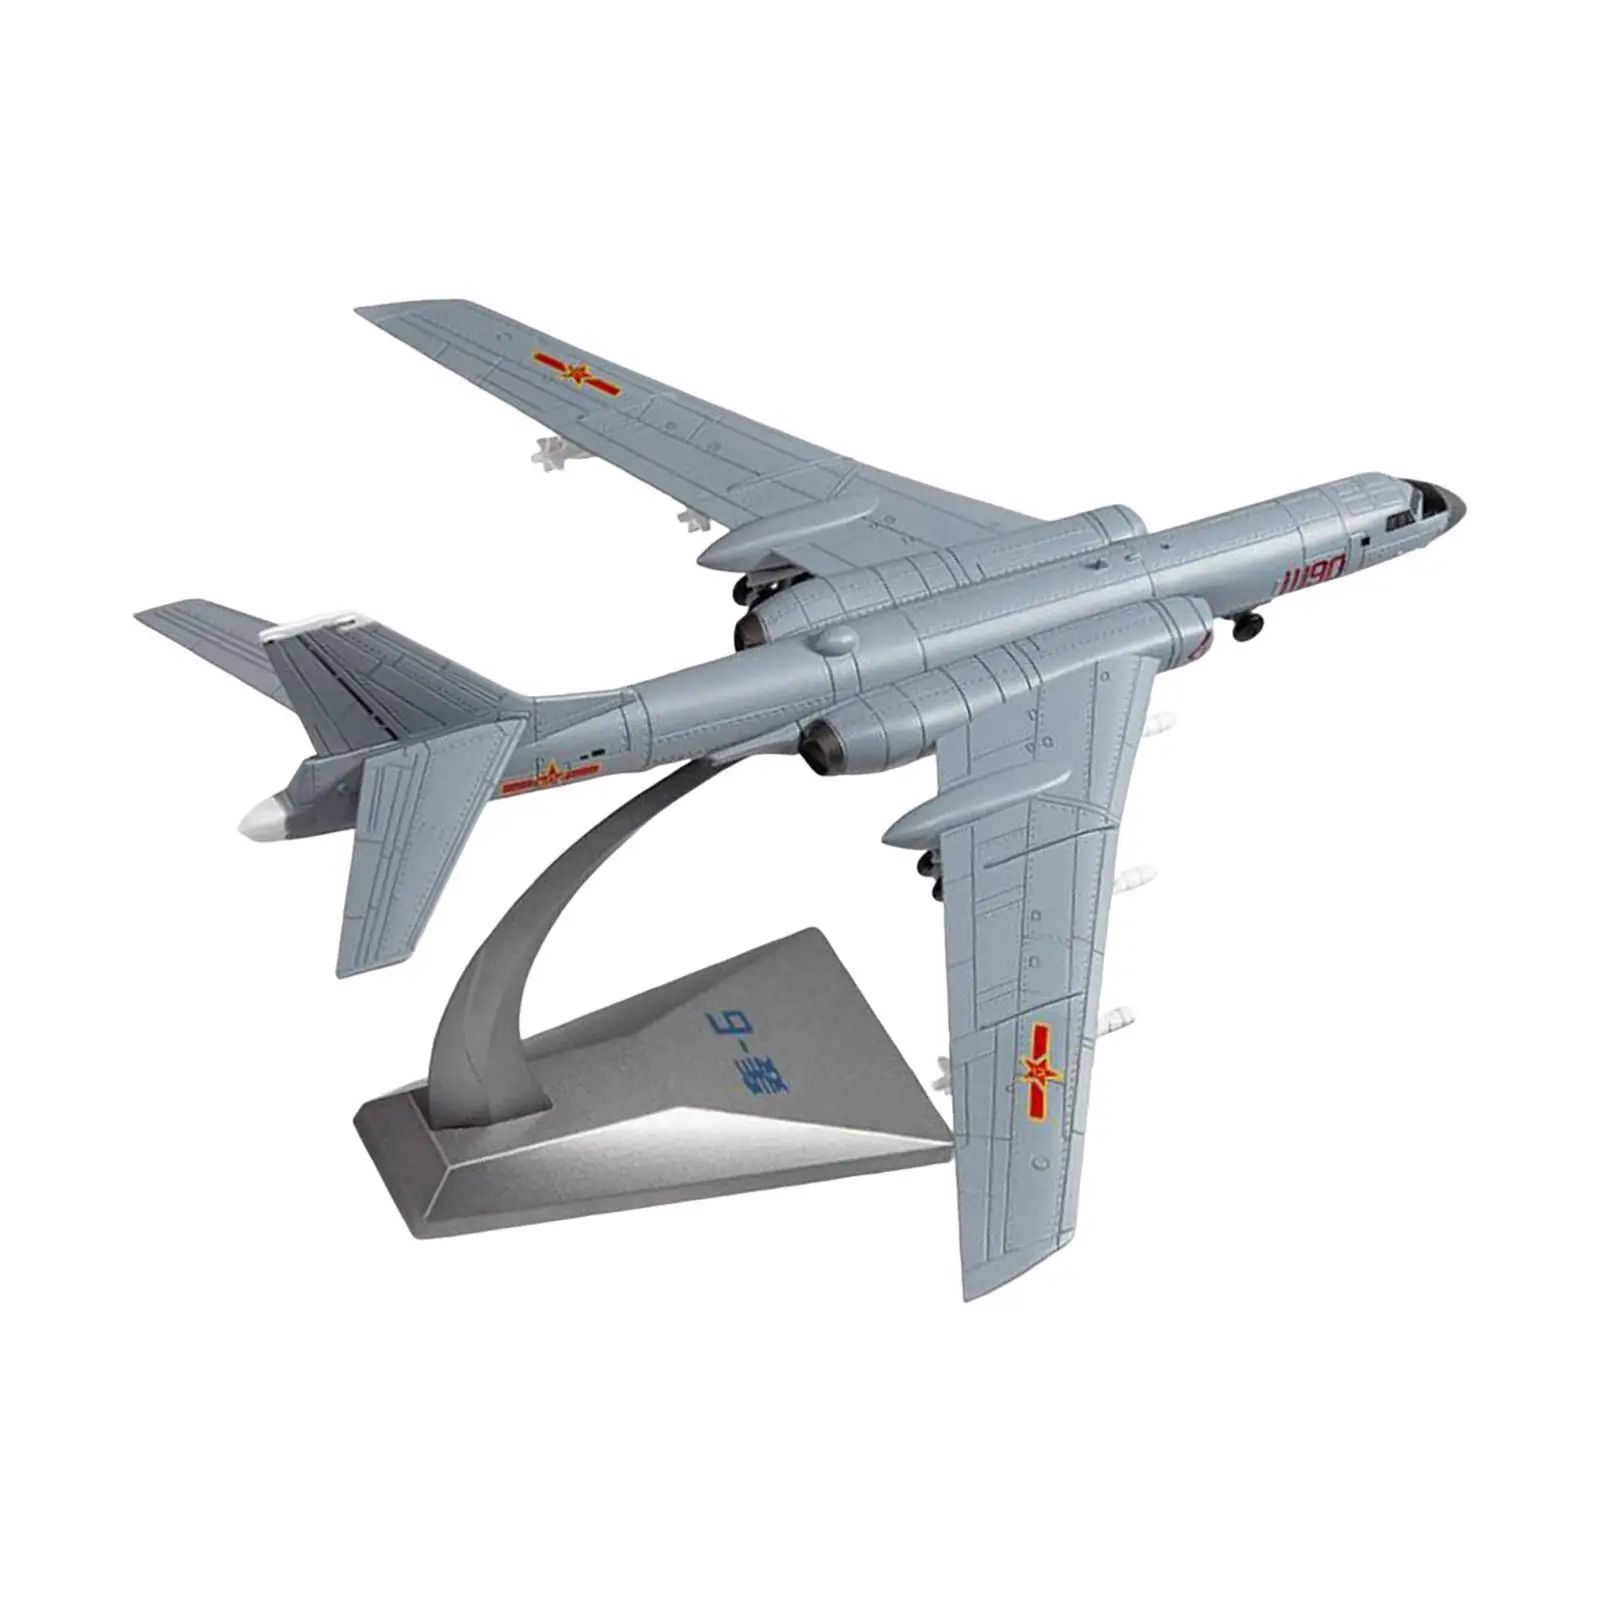 Simulation fighter Toy DIY Project Collectibles 1/144 Alloy Aircraft Model for Game Plane Souvenir Decoration Adults Gifts